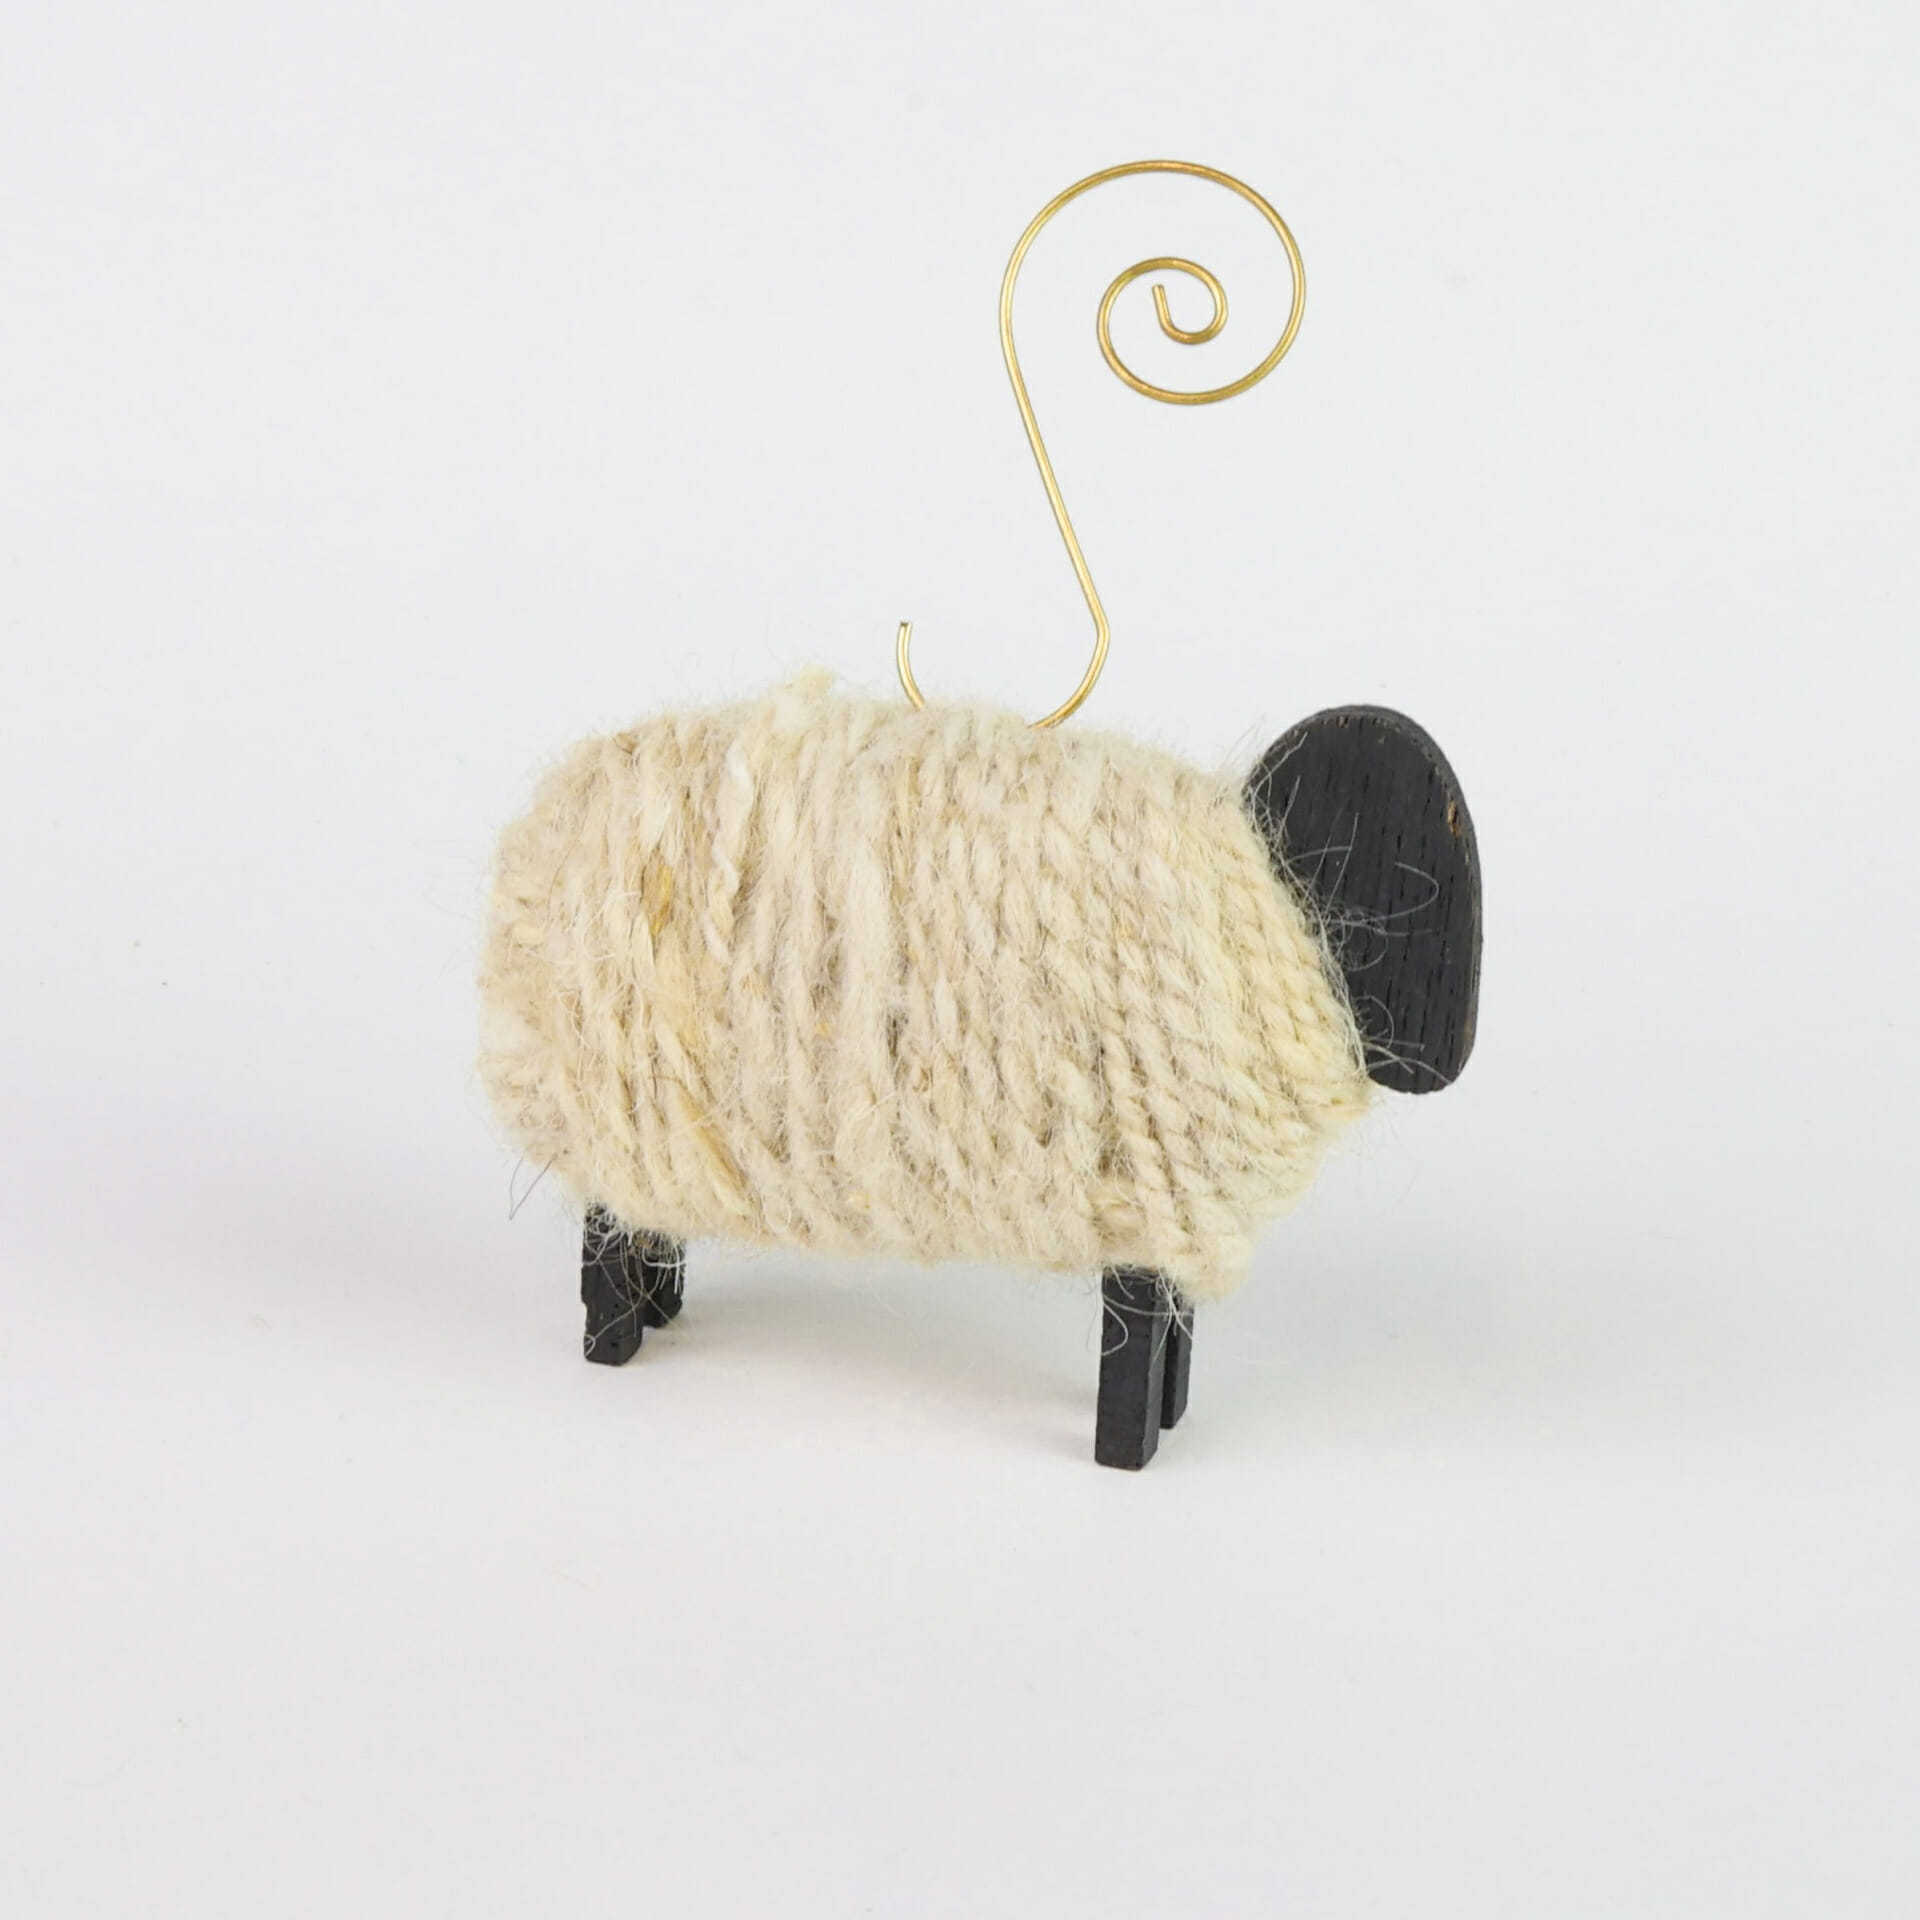 Sheep custom ornament with removable gold hook